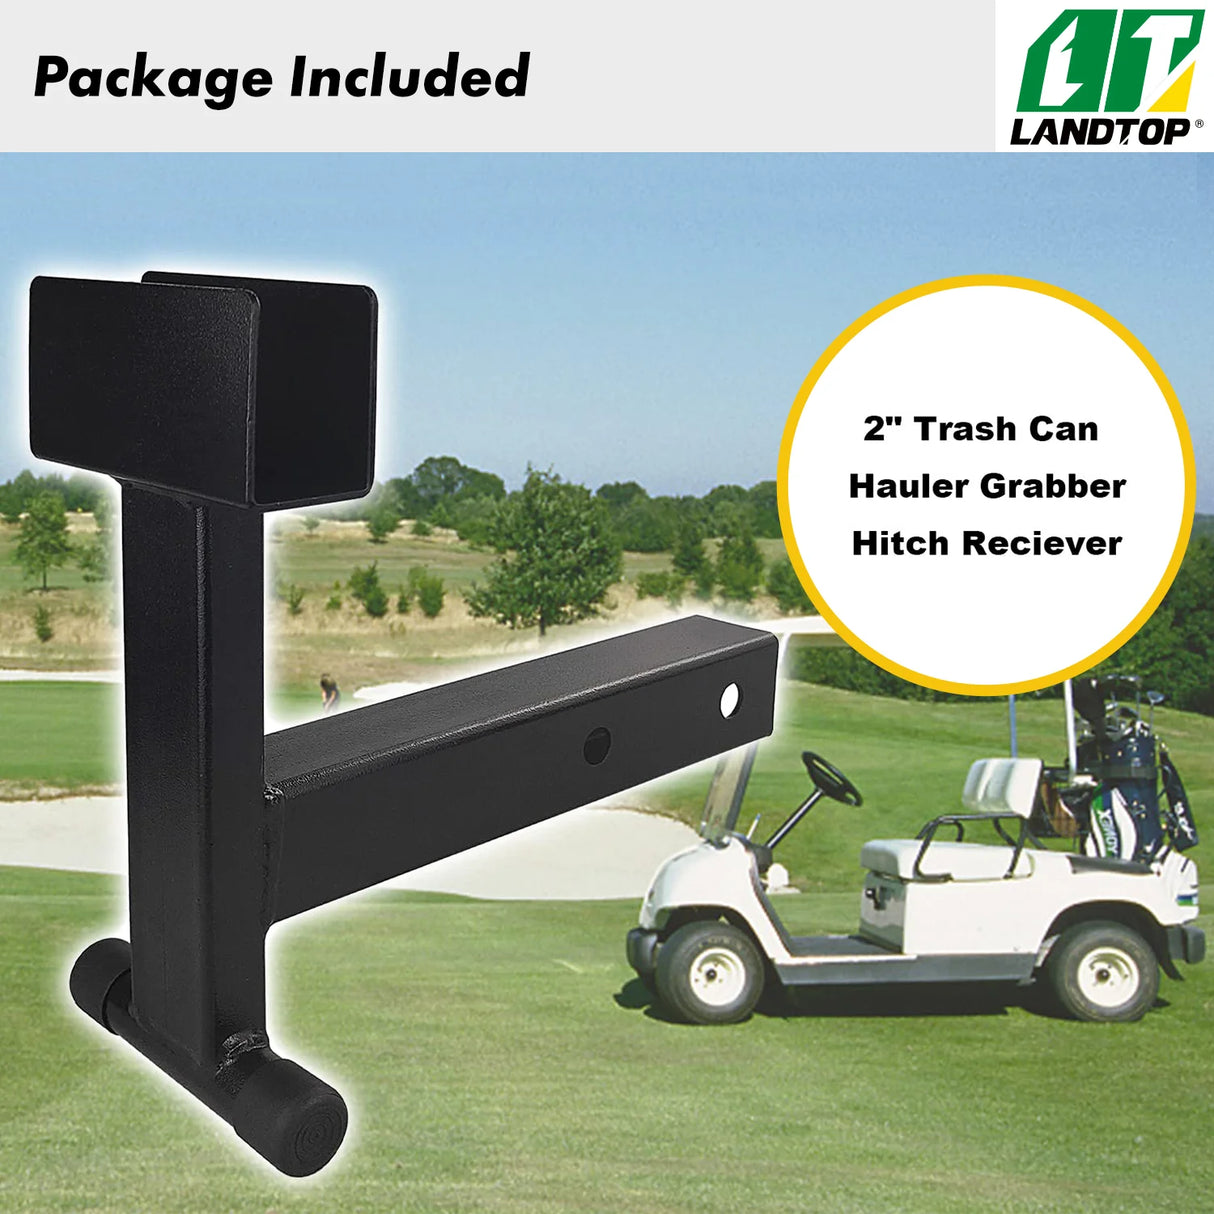 Trash Can Hauler Grabber with 2 inch Hitch Reciever, Garbage Hauling Towing Hitch Attachment on Lawnmower Three Point Hitch Fit for Lawn Mower Garden Tractors